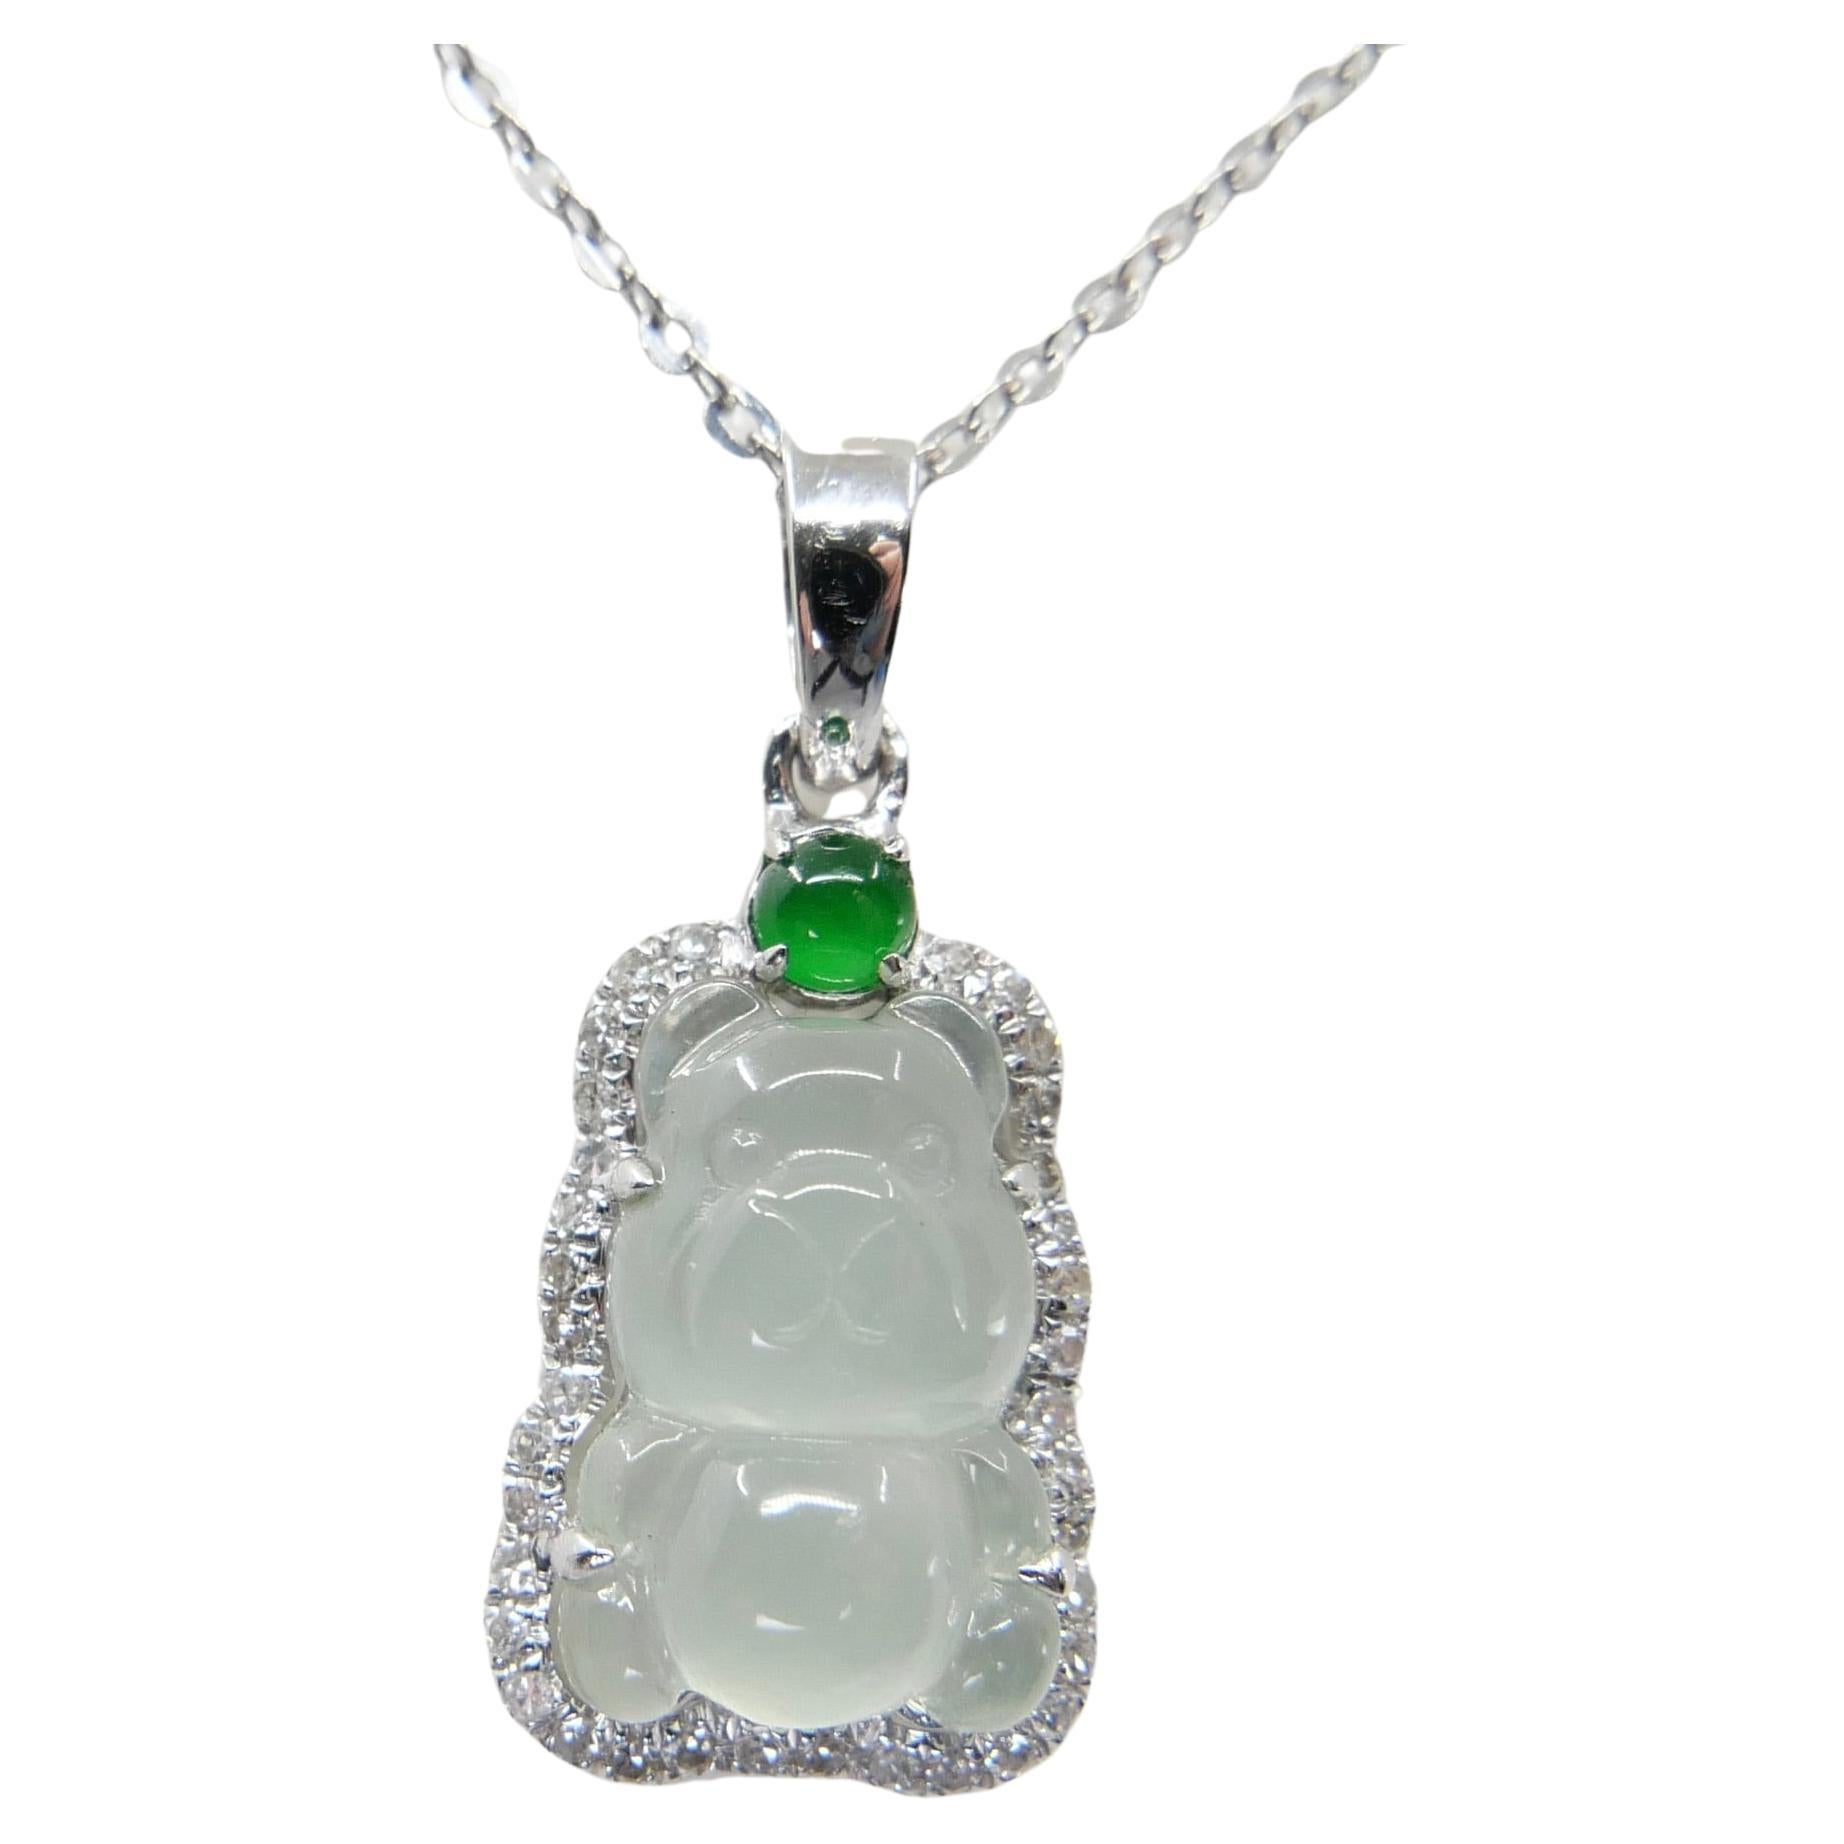 Certified Imperial & Icy Jade Diamond Gummy Bear Pendant, Cuteness Overload For Sale